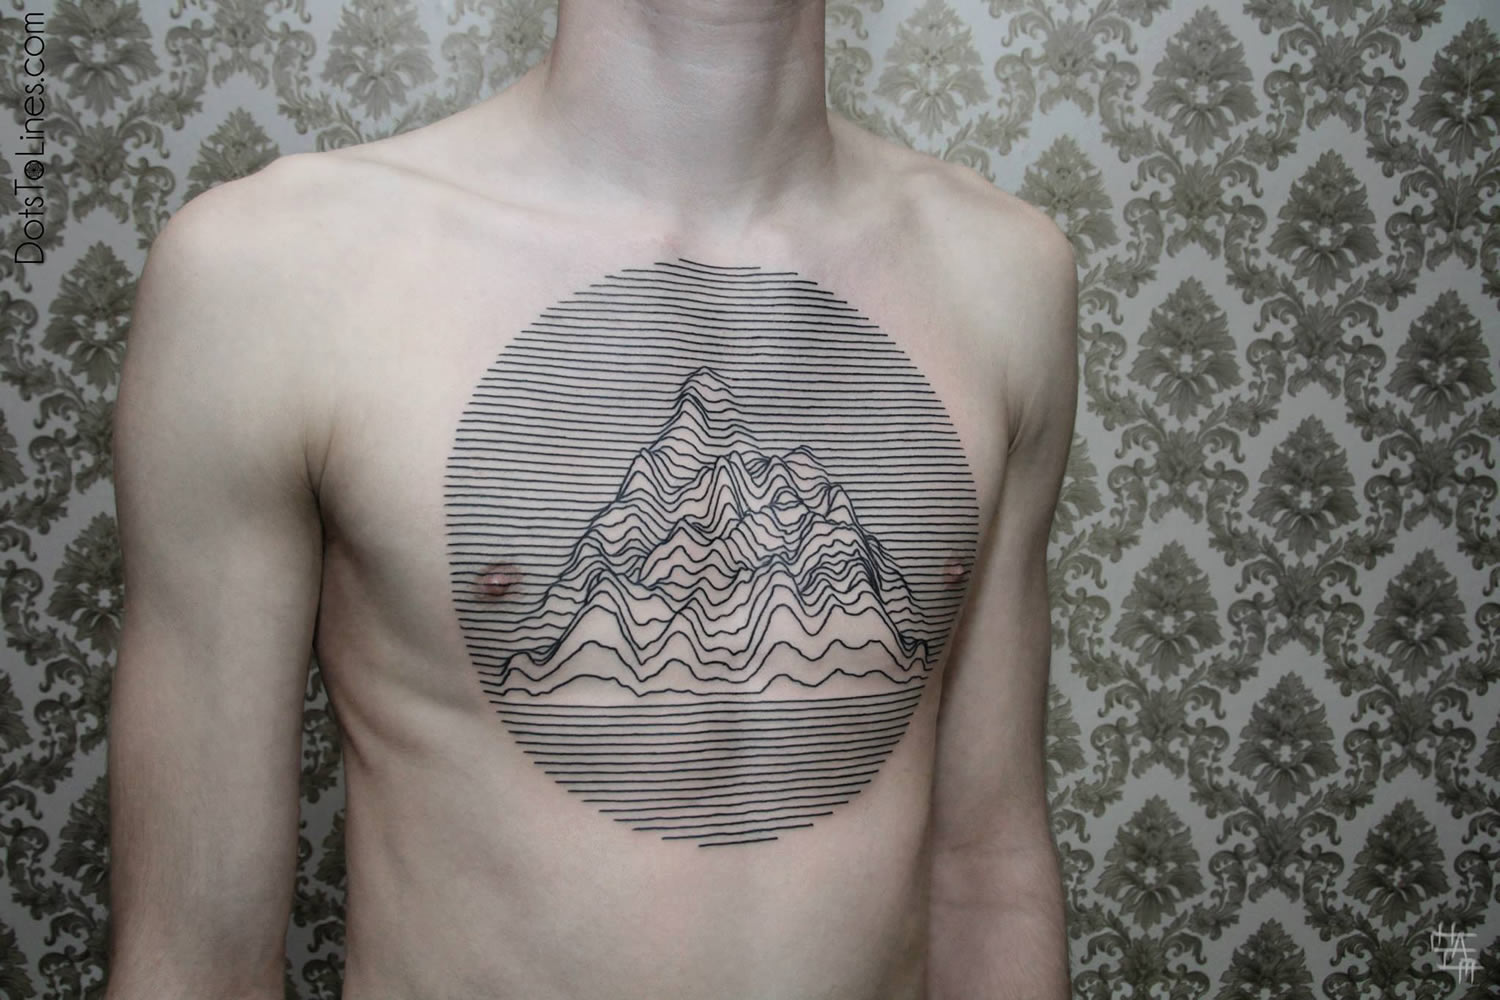 lines forming a mountain on chest, tattoo by chaim machlev